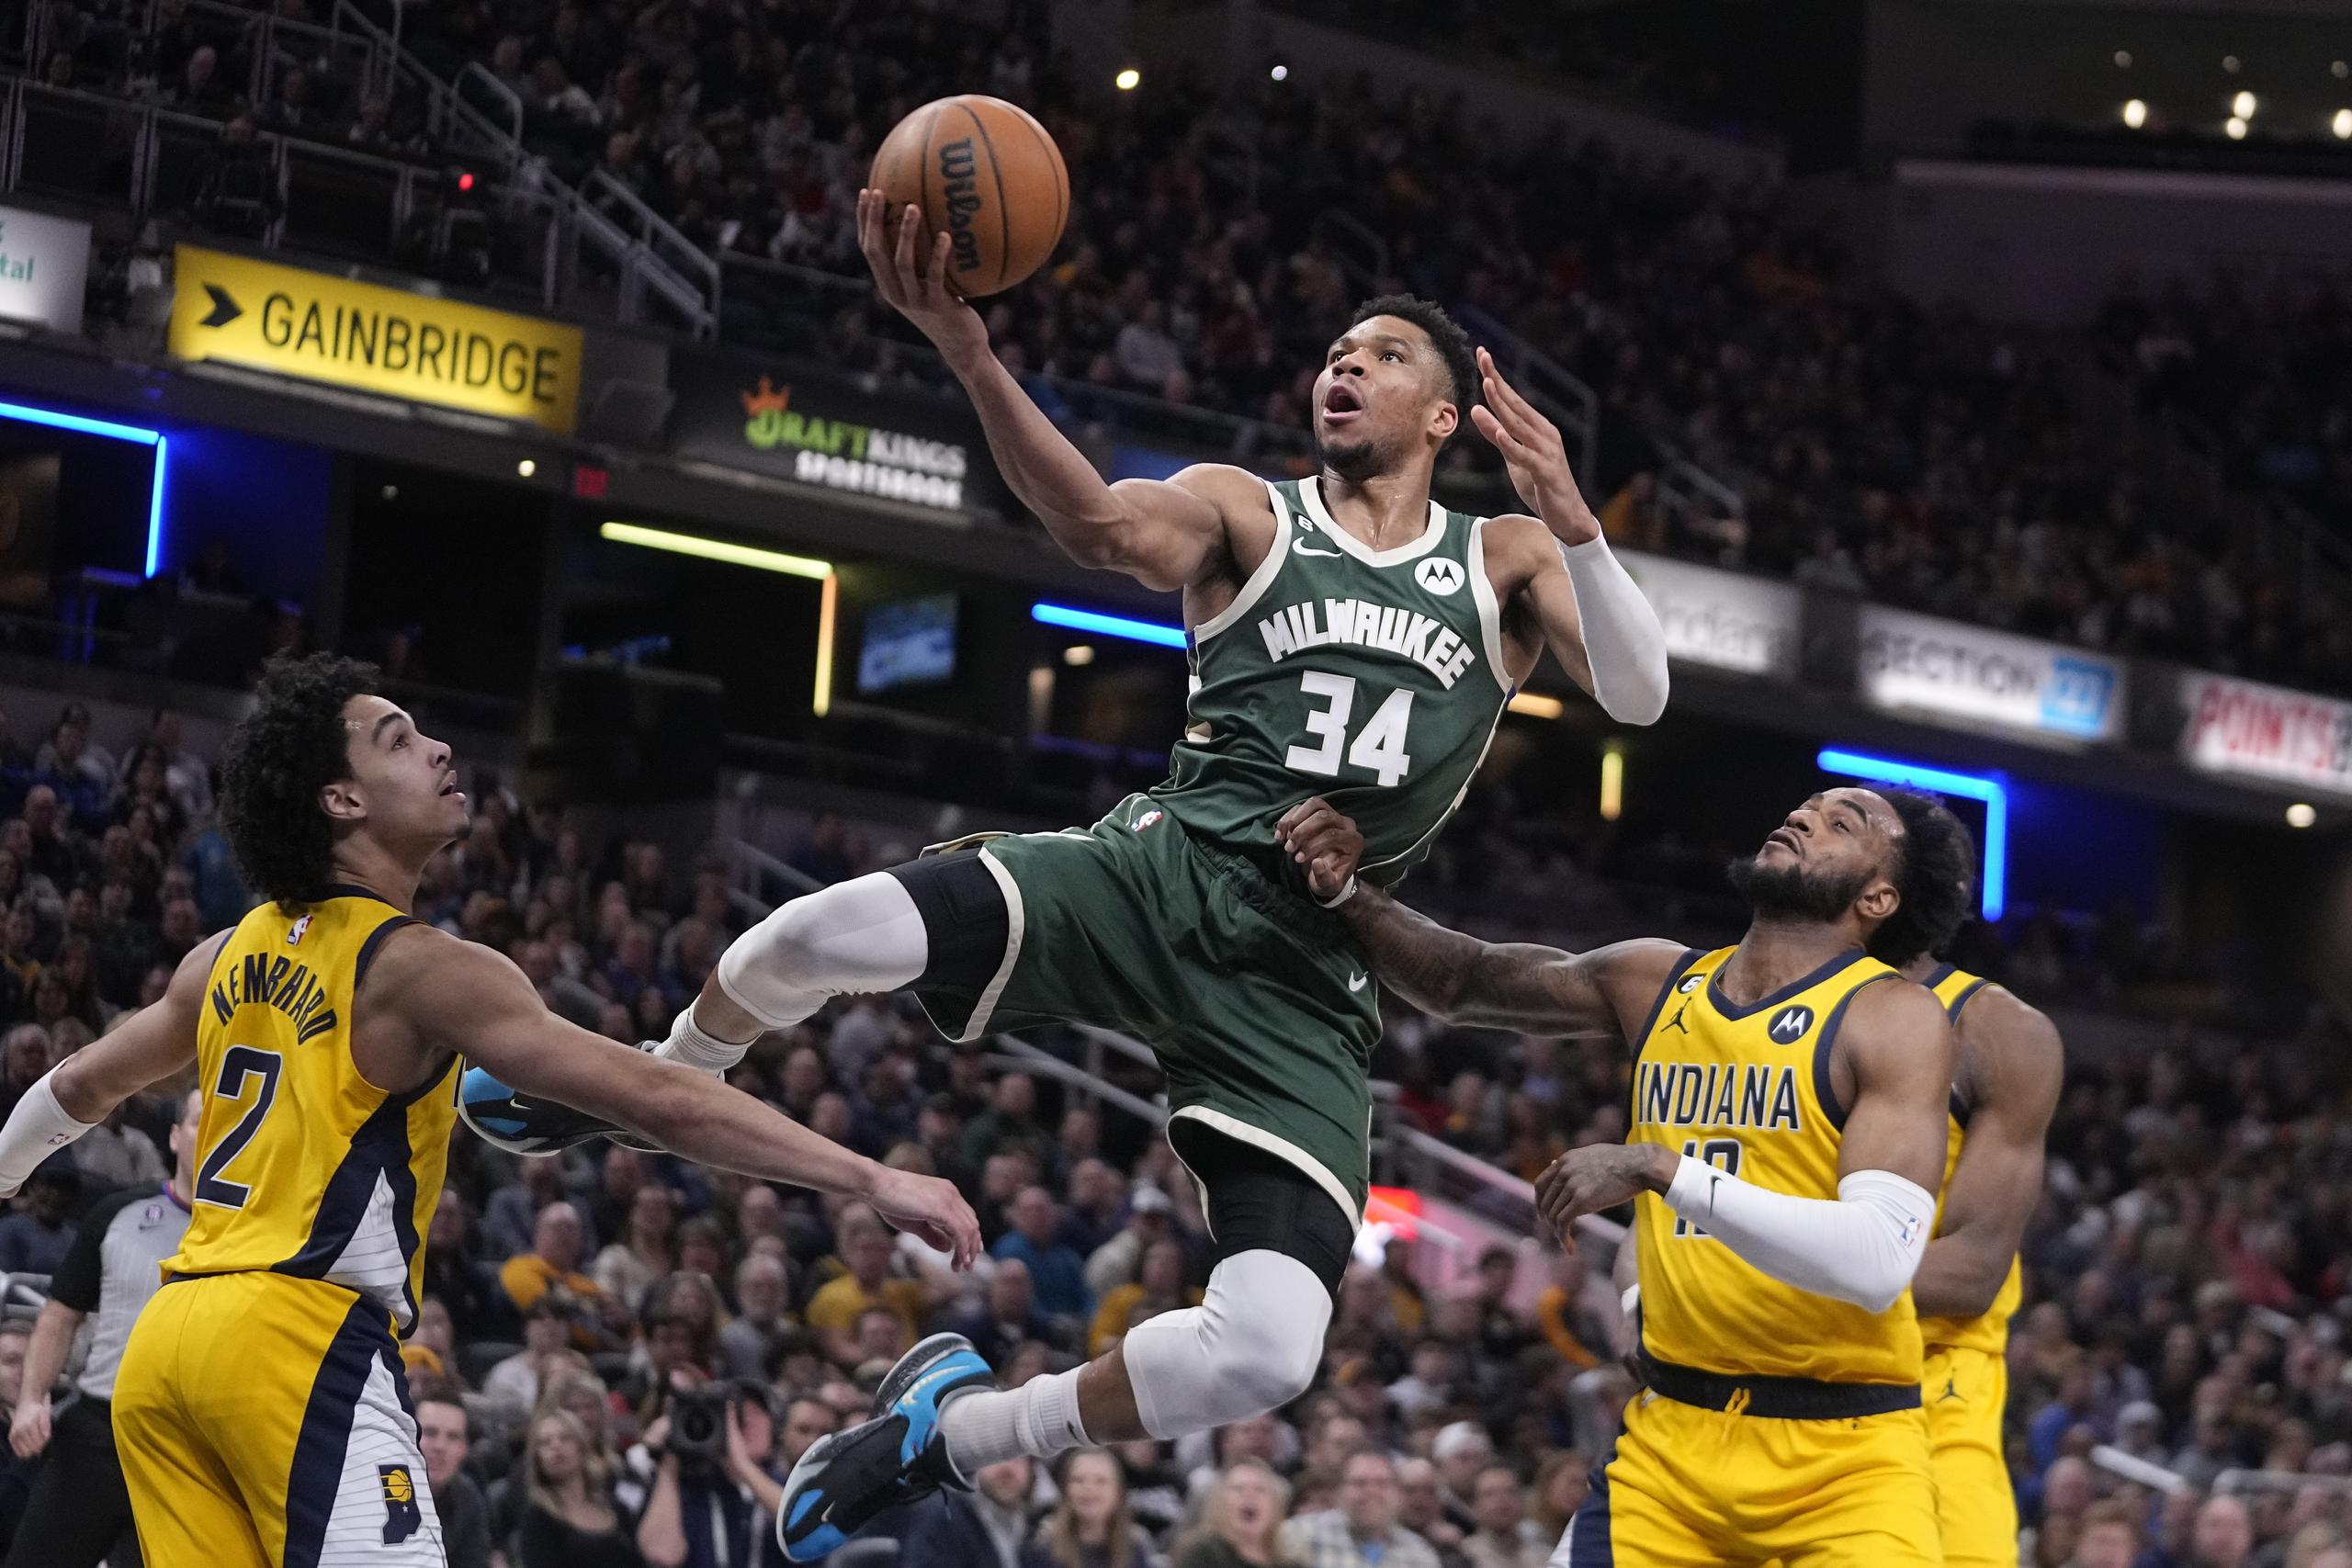 Giannis Antetokounmpo is one of those who could approach 38,000 points.